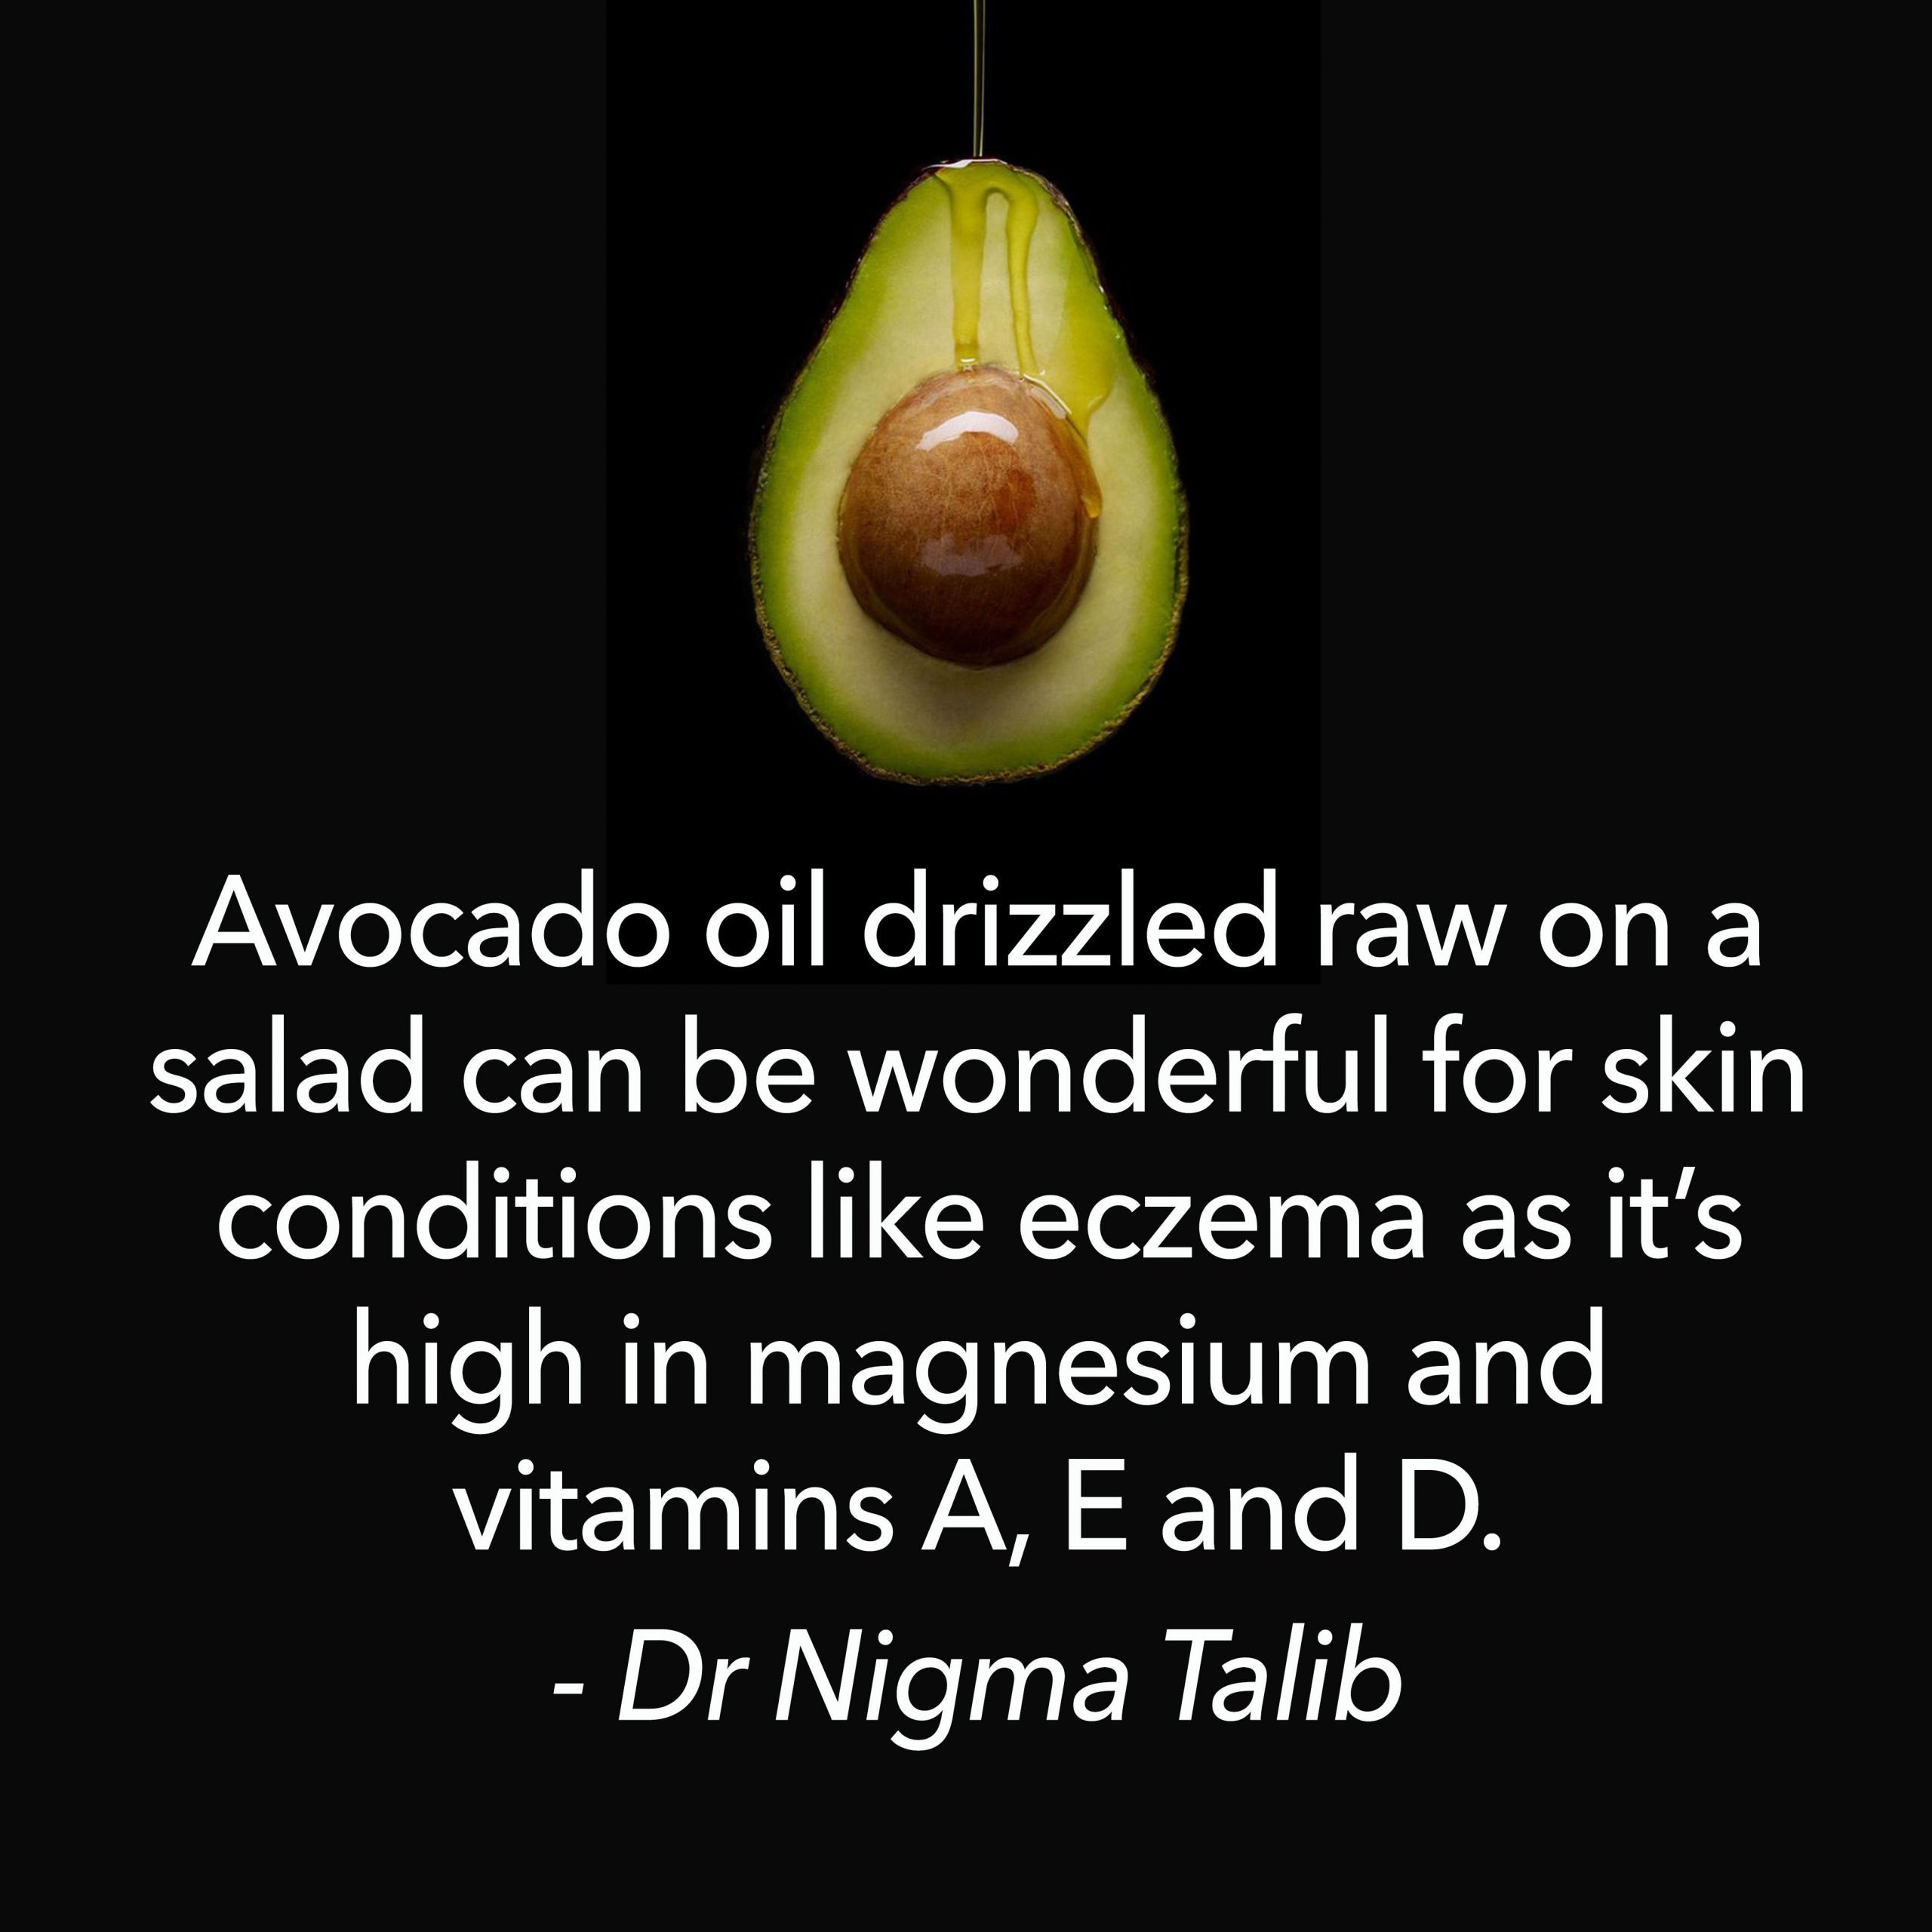 Avocado oil drizzled raw on salad can be wonderful for ...